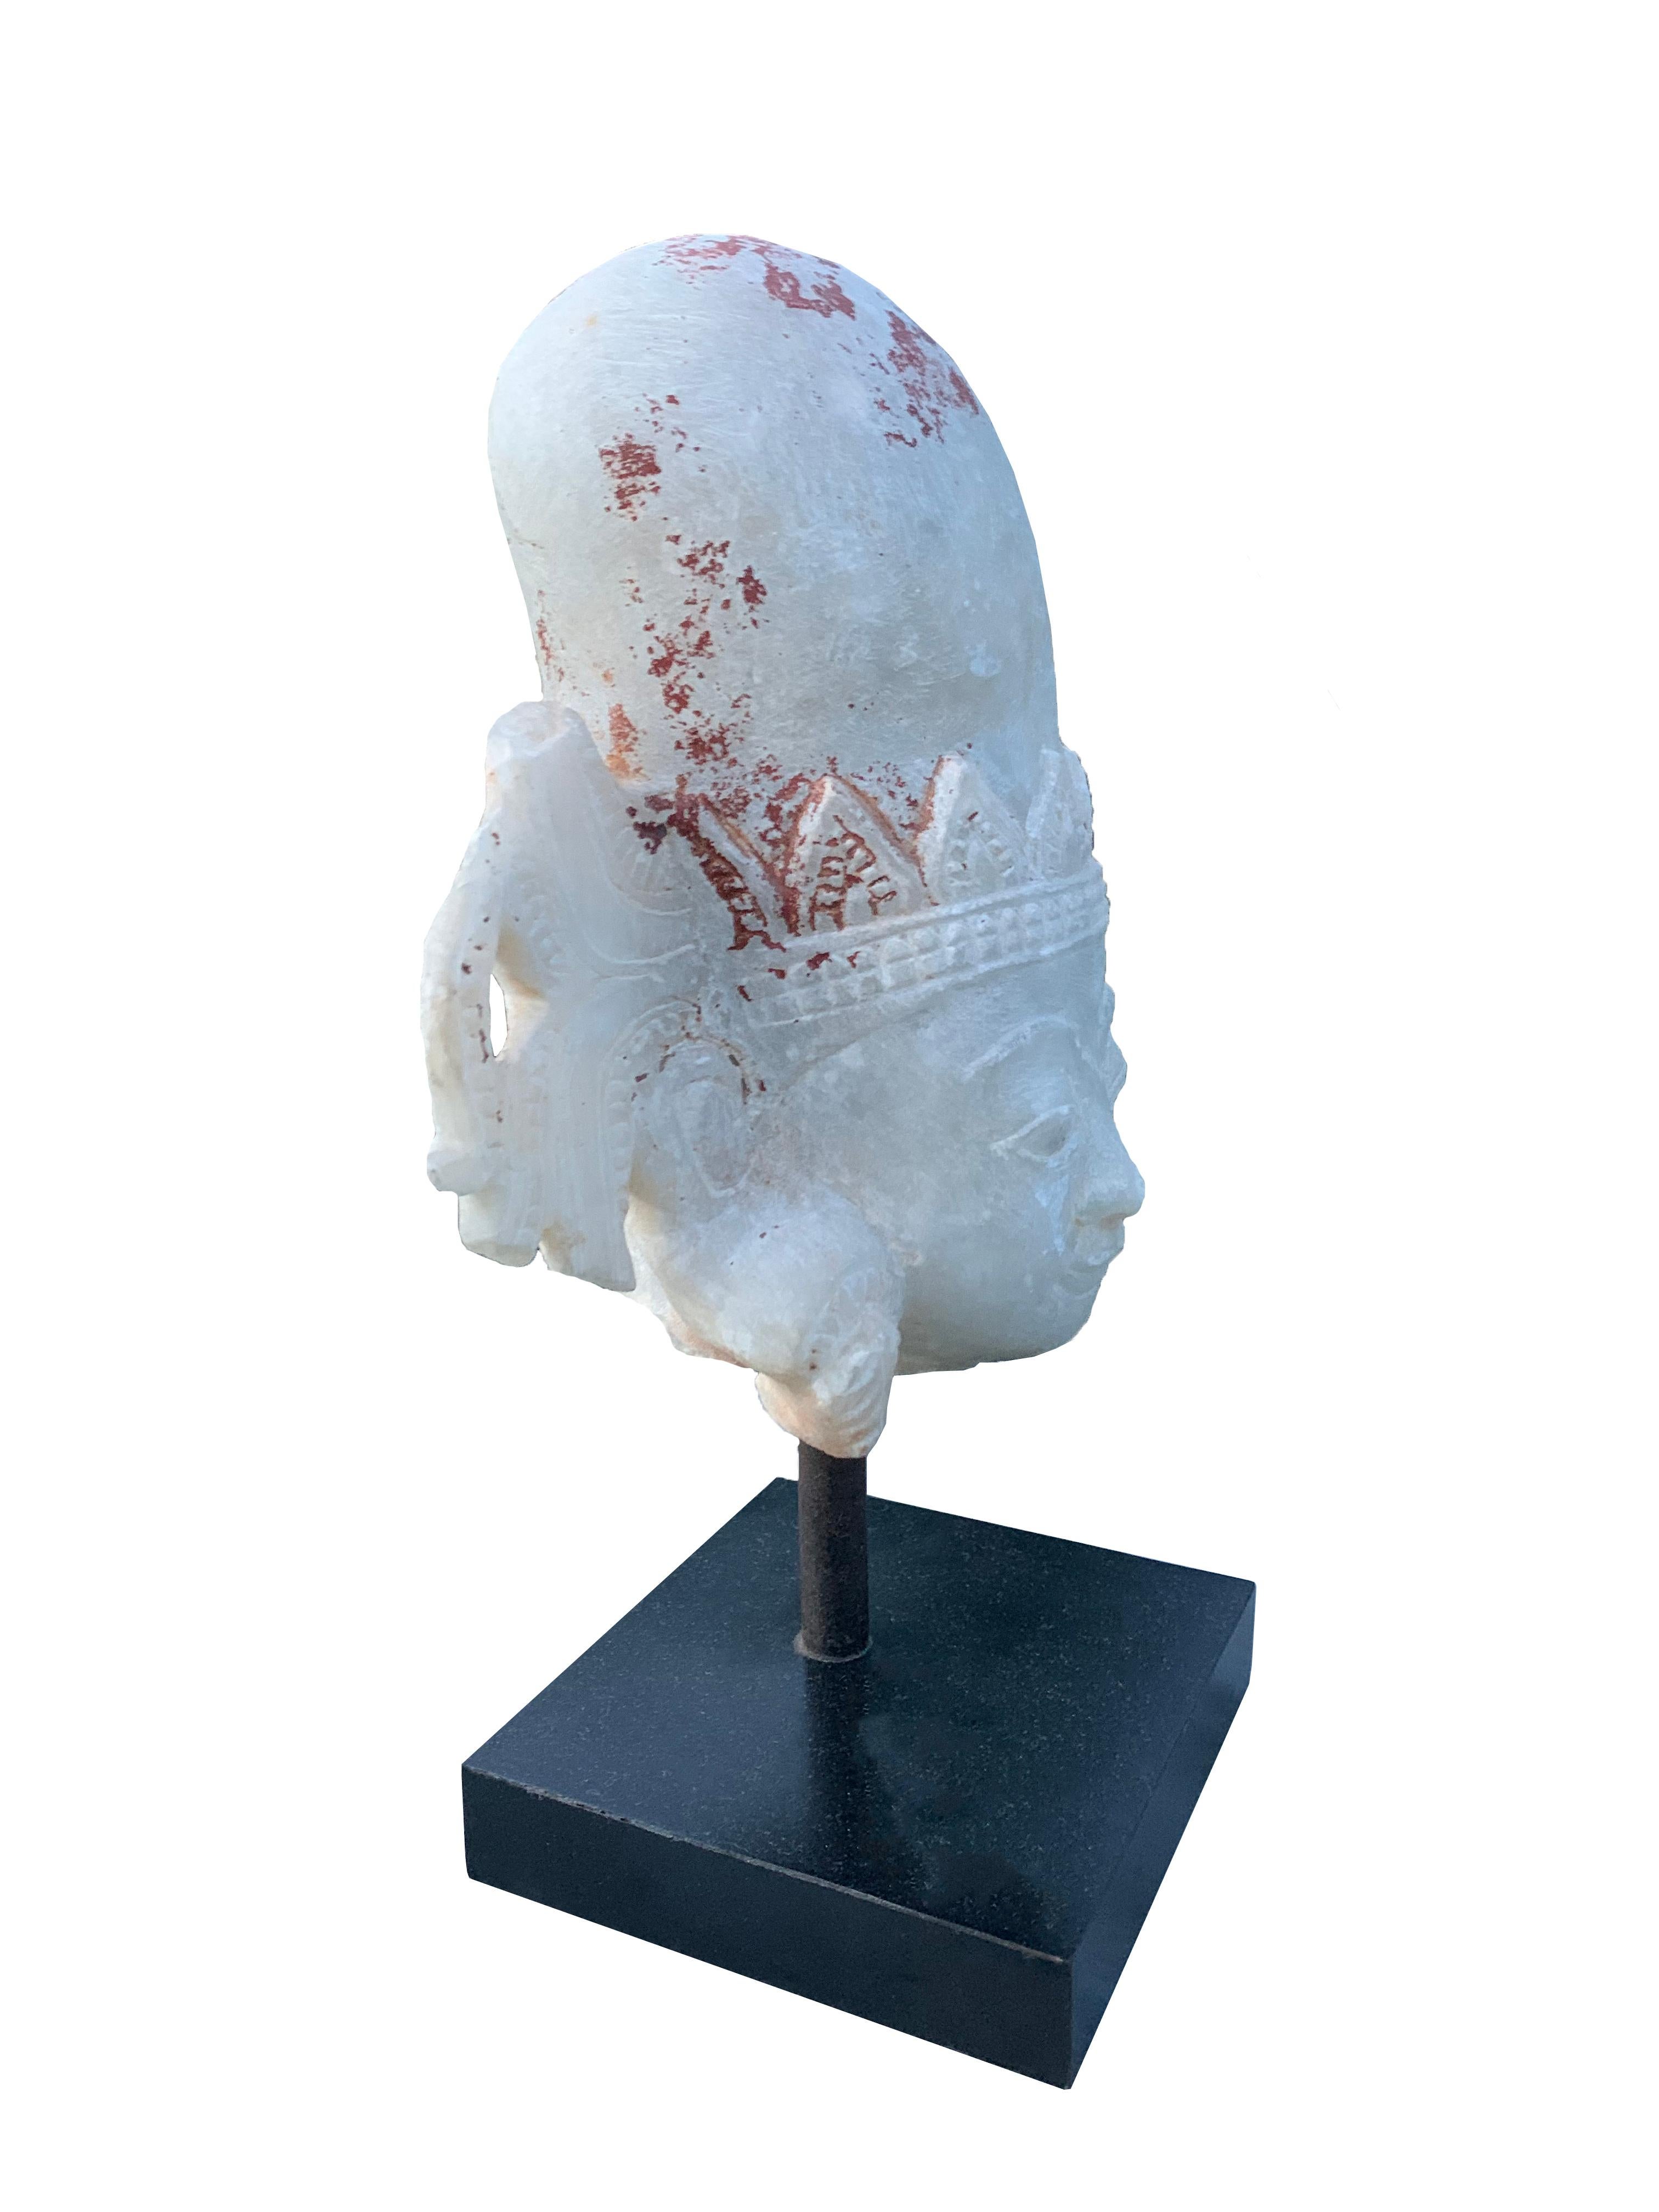 Carved 19th Century Burmese Shan State Marble Head of the Buddha For Sale